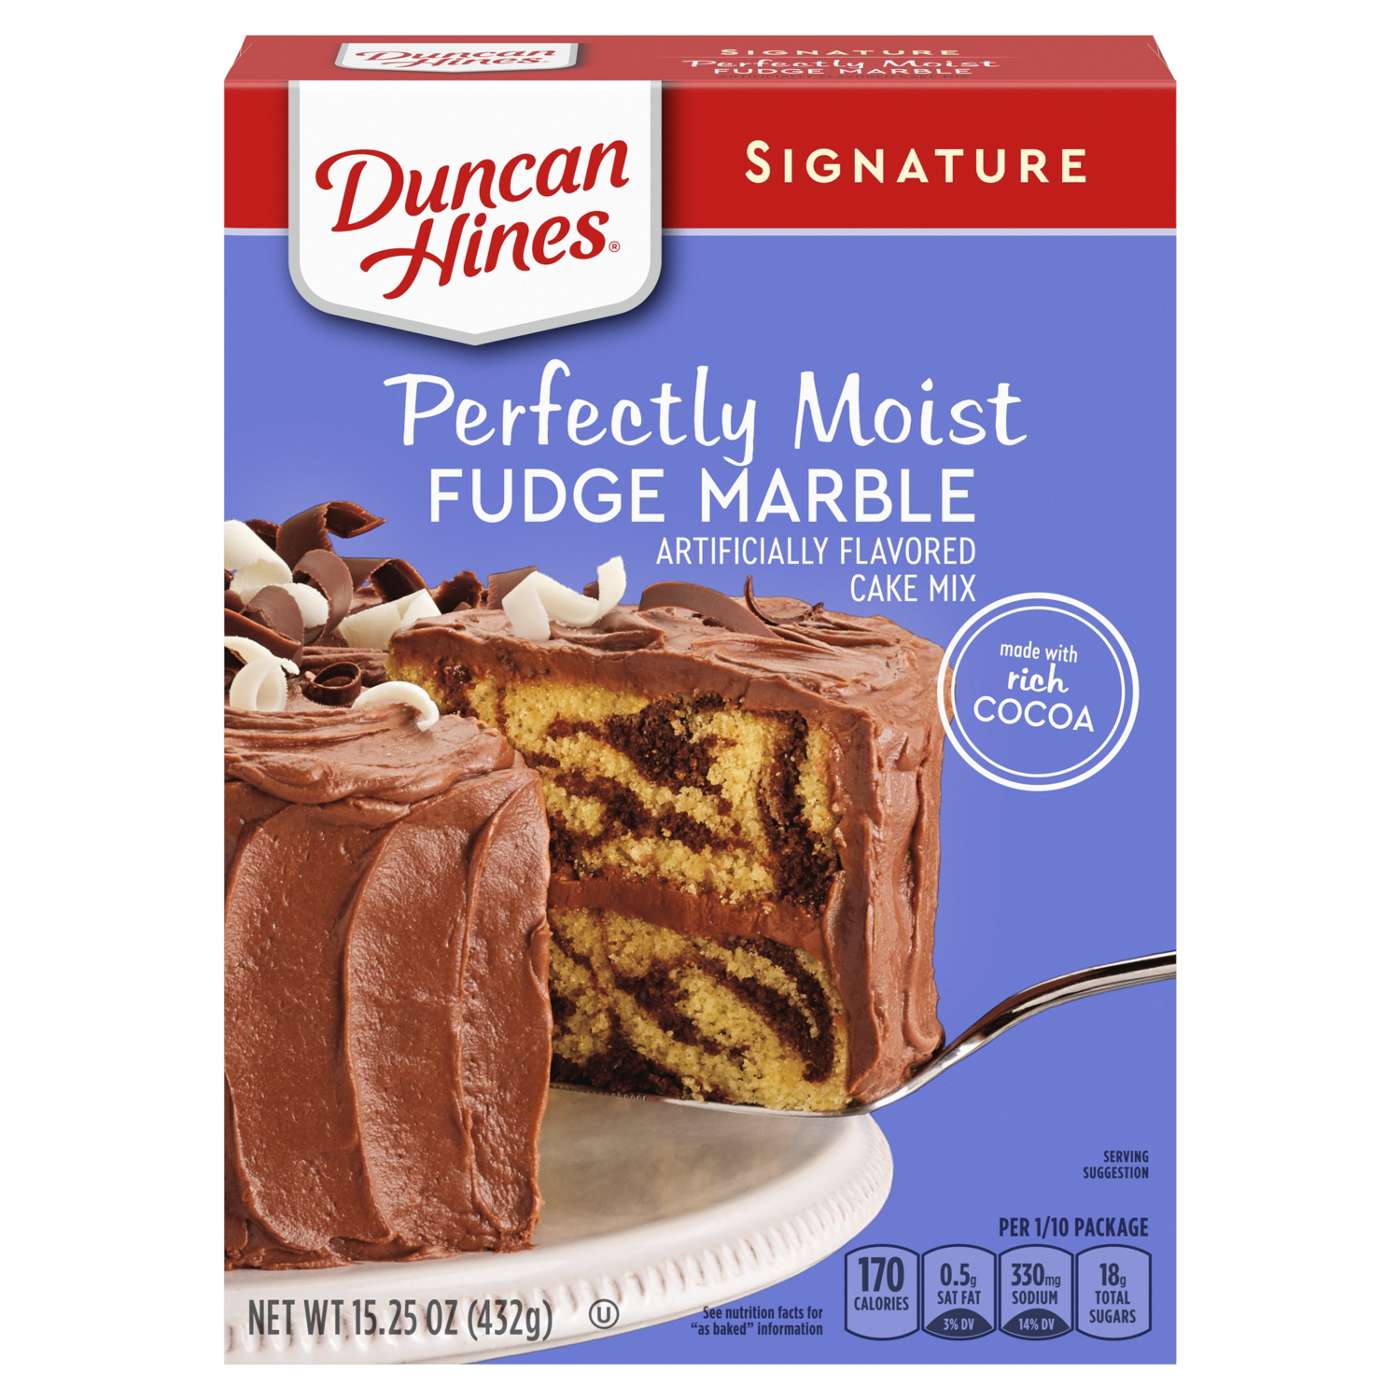 Duncan Hines Signature Perfectly Moist Fudge Marble Cake Mix; image 1 of 4